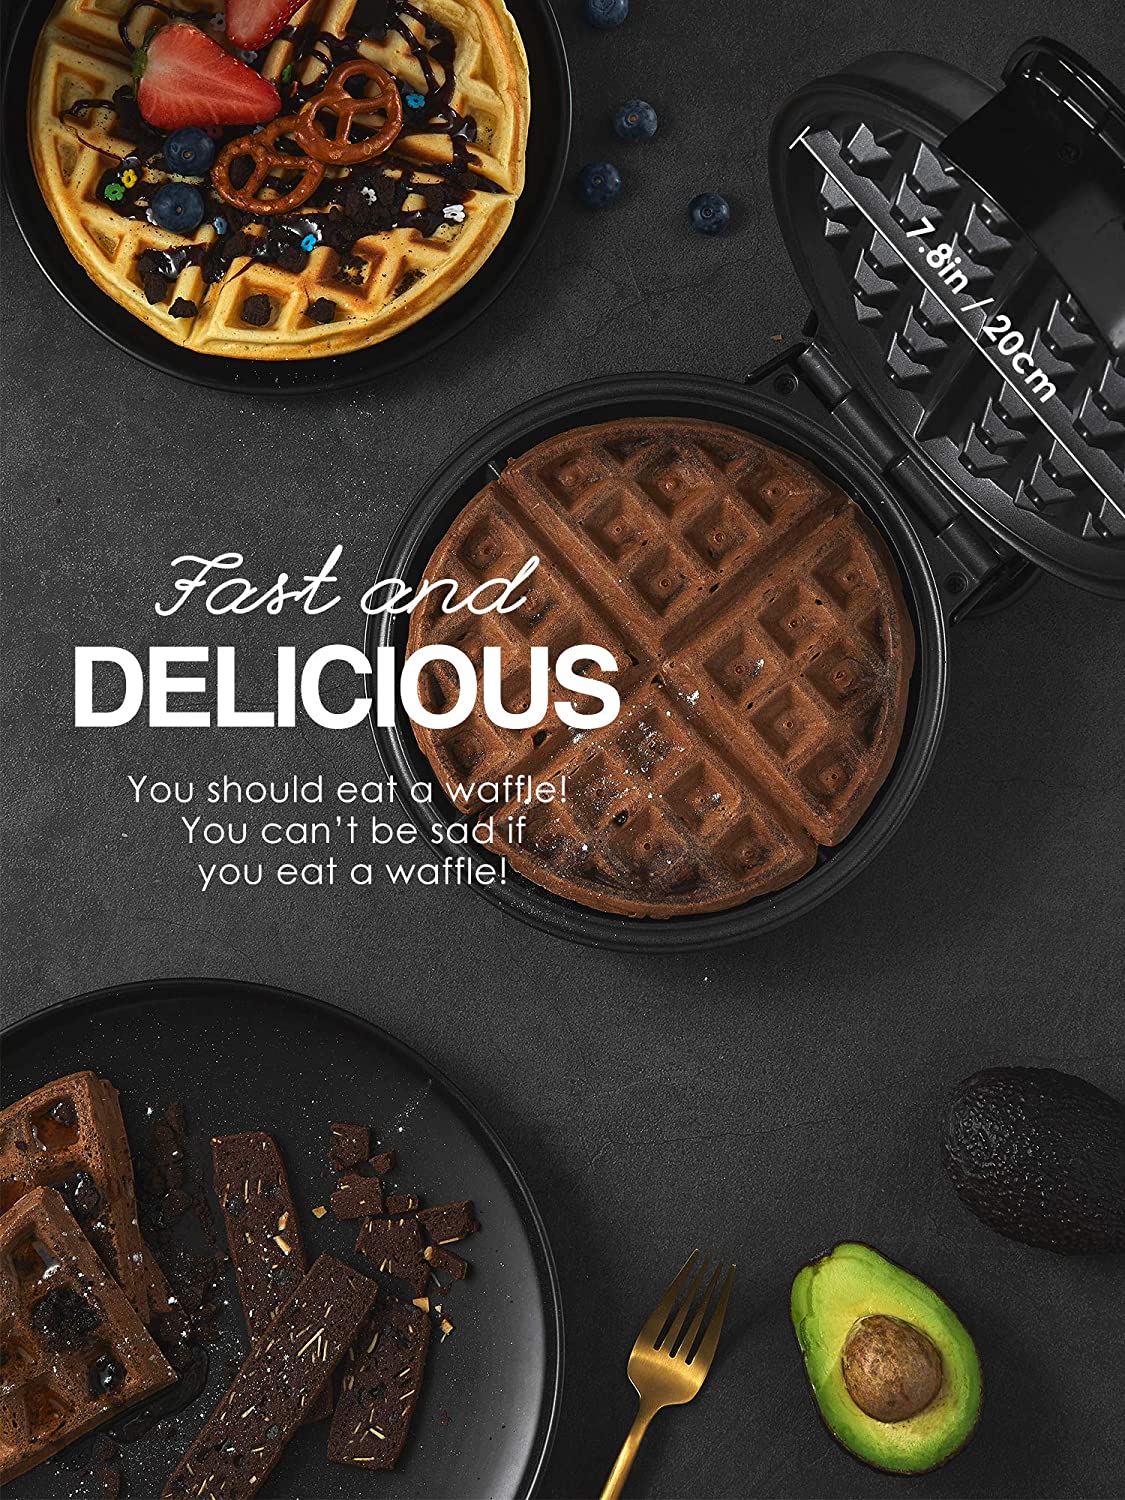 AICOOK | Waffle Maker Iron, Belgian Medium Waffle Iron, Stainless Steel, Adjustable Temperature Dial, Nonstick Plates & Cool Touch Handle, Contains Recipe 